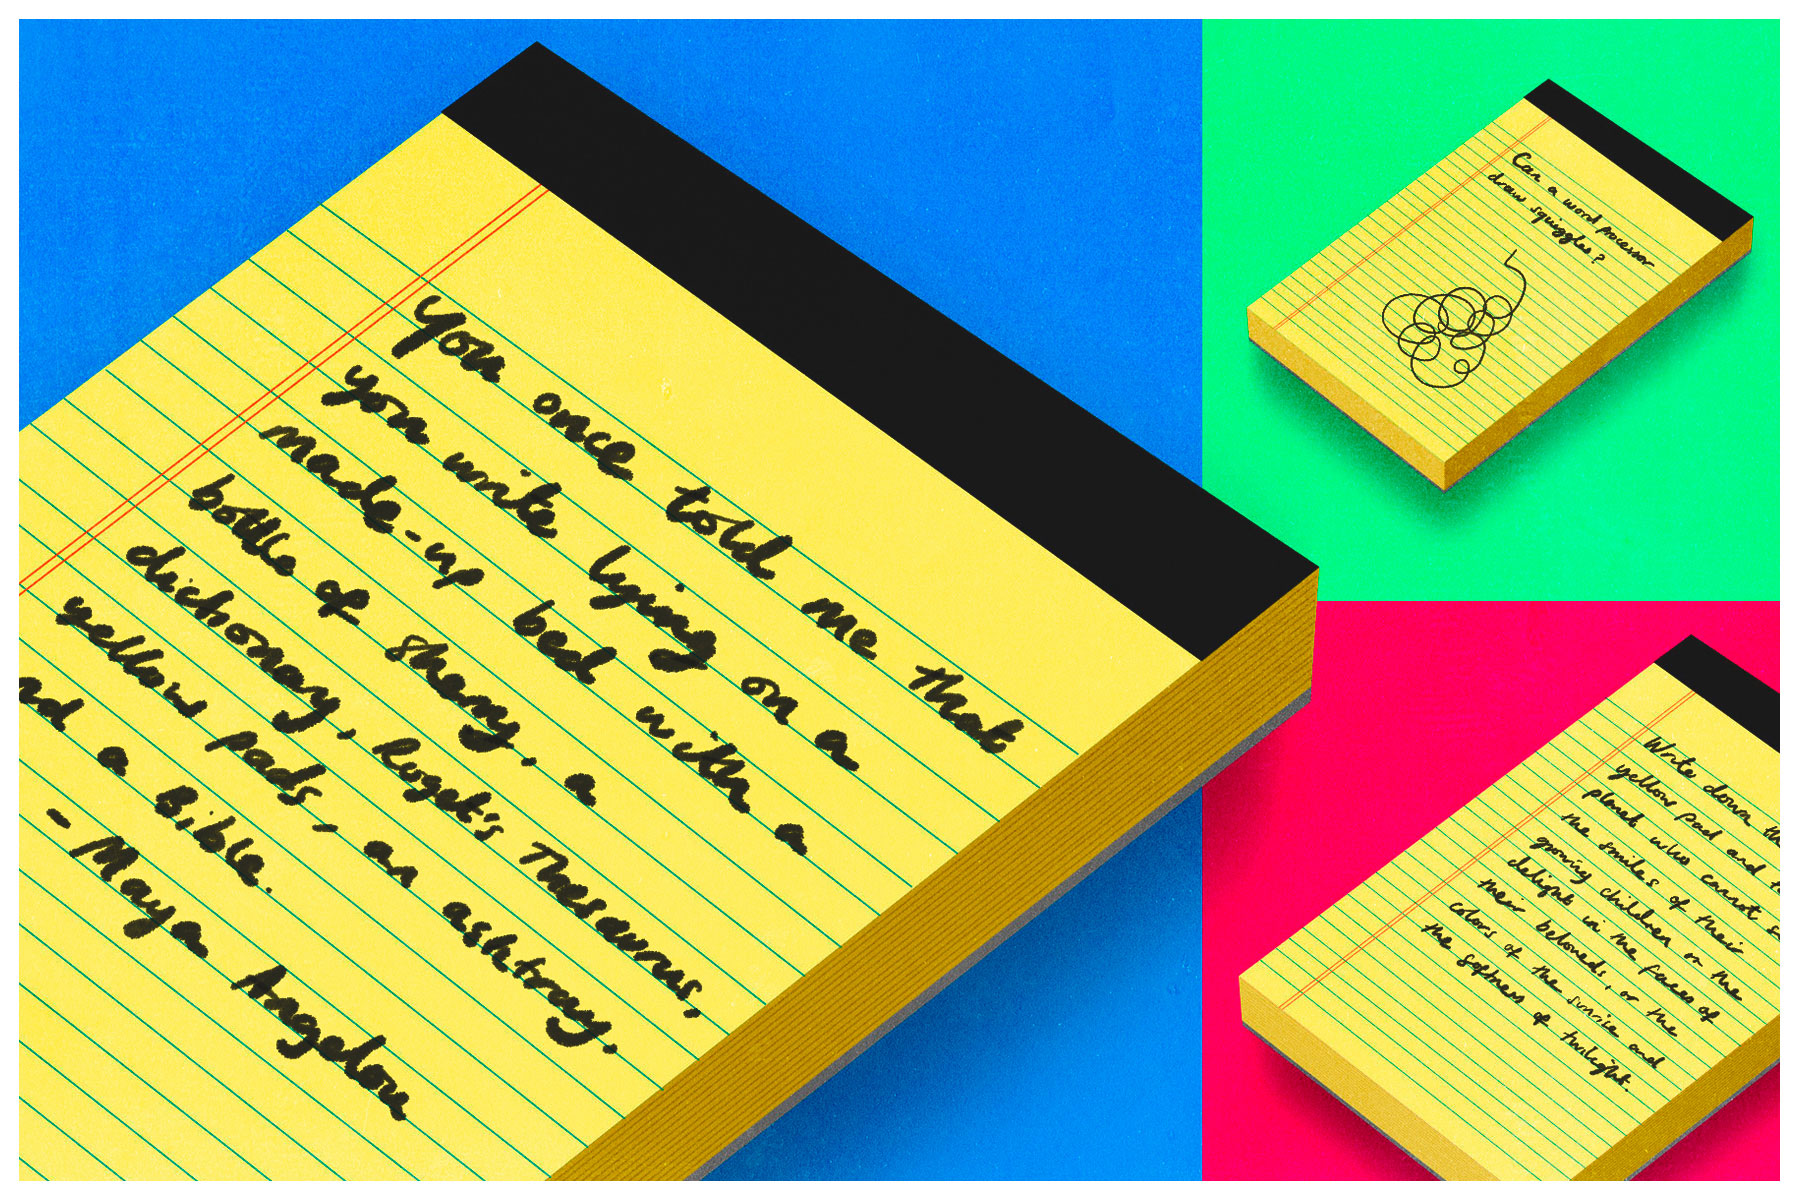 An illustration of a yellow legal pad with notes on, recreated in three different boxes